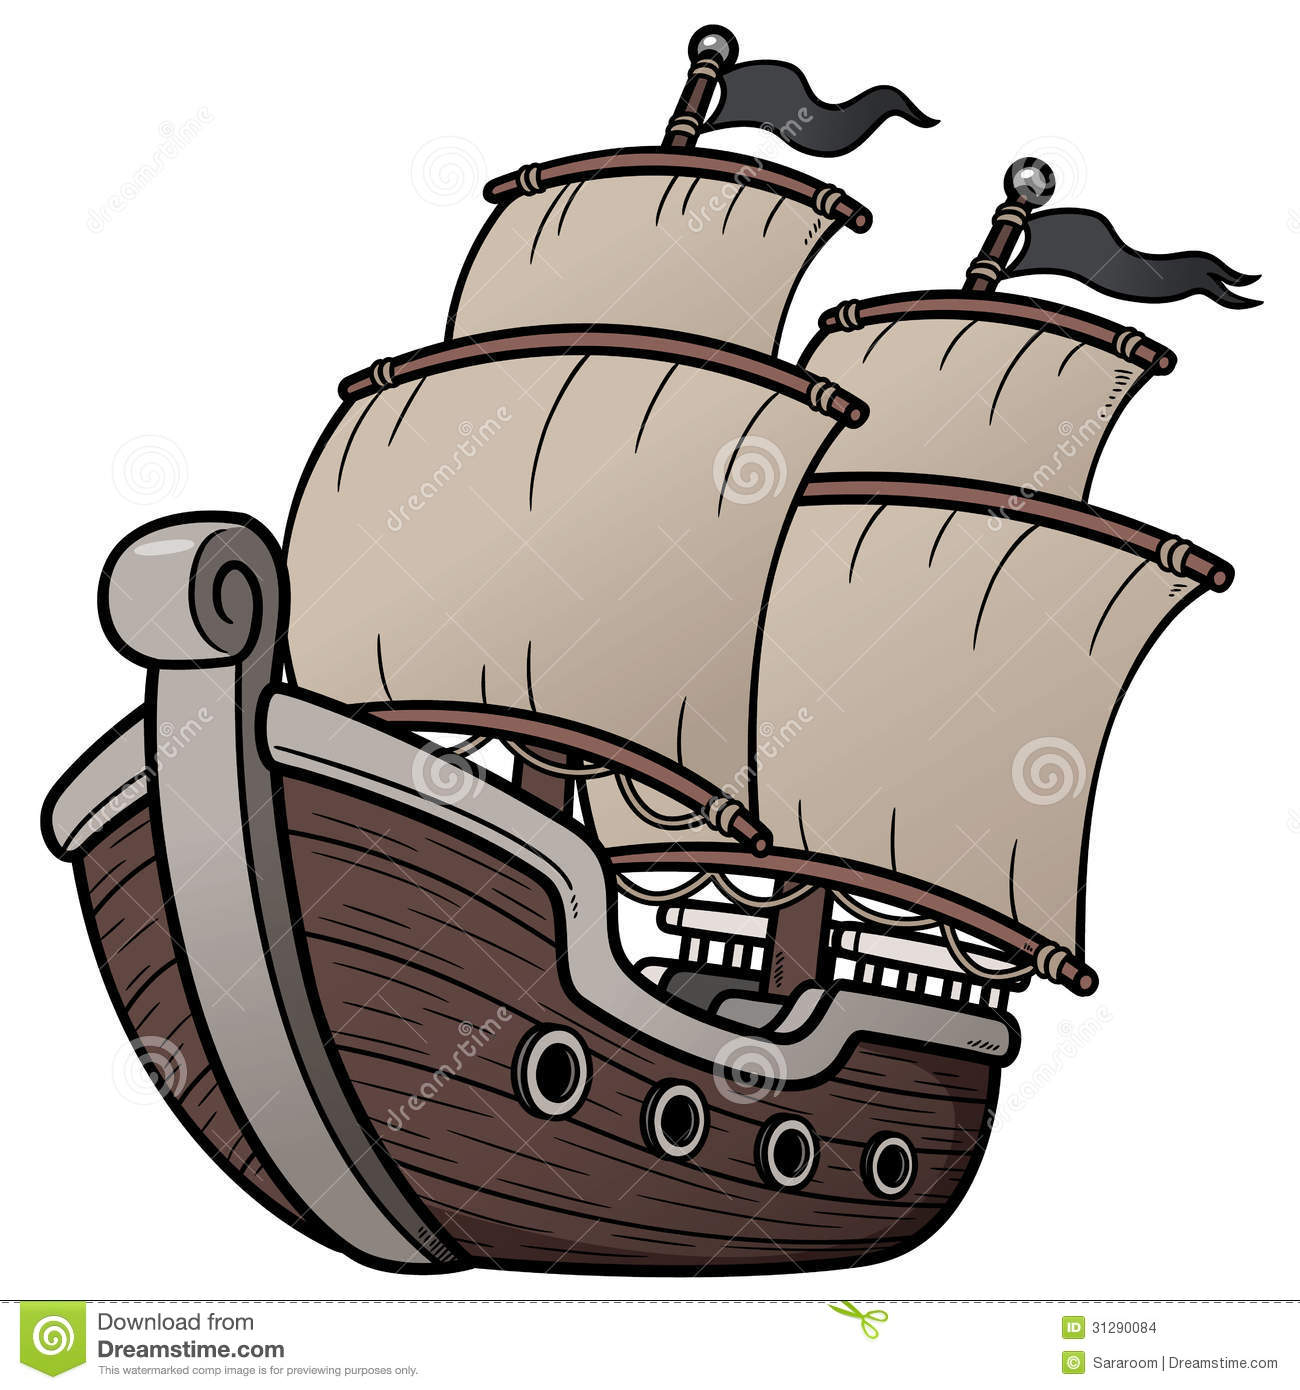 Pirate Ship Stock Images   Image  31290084